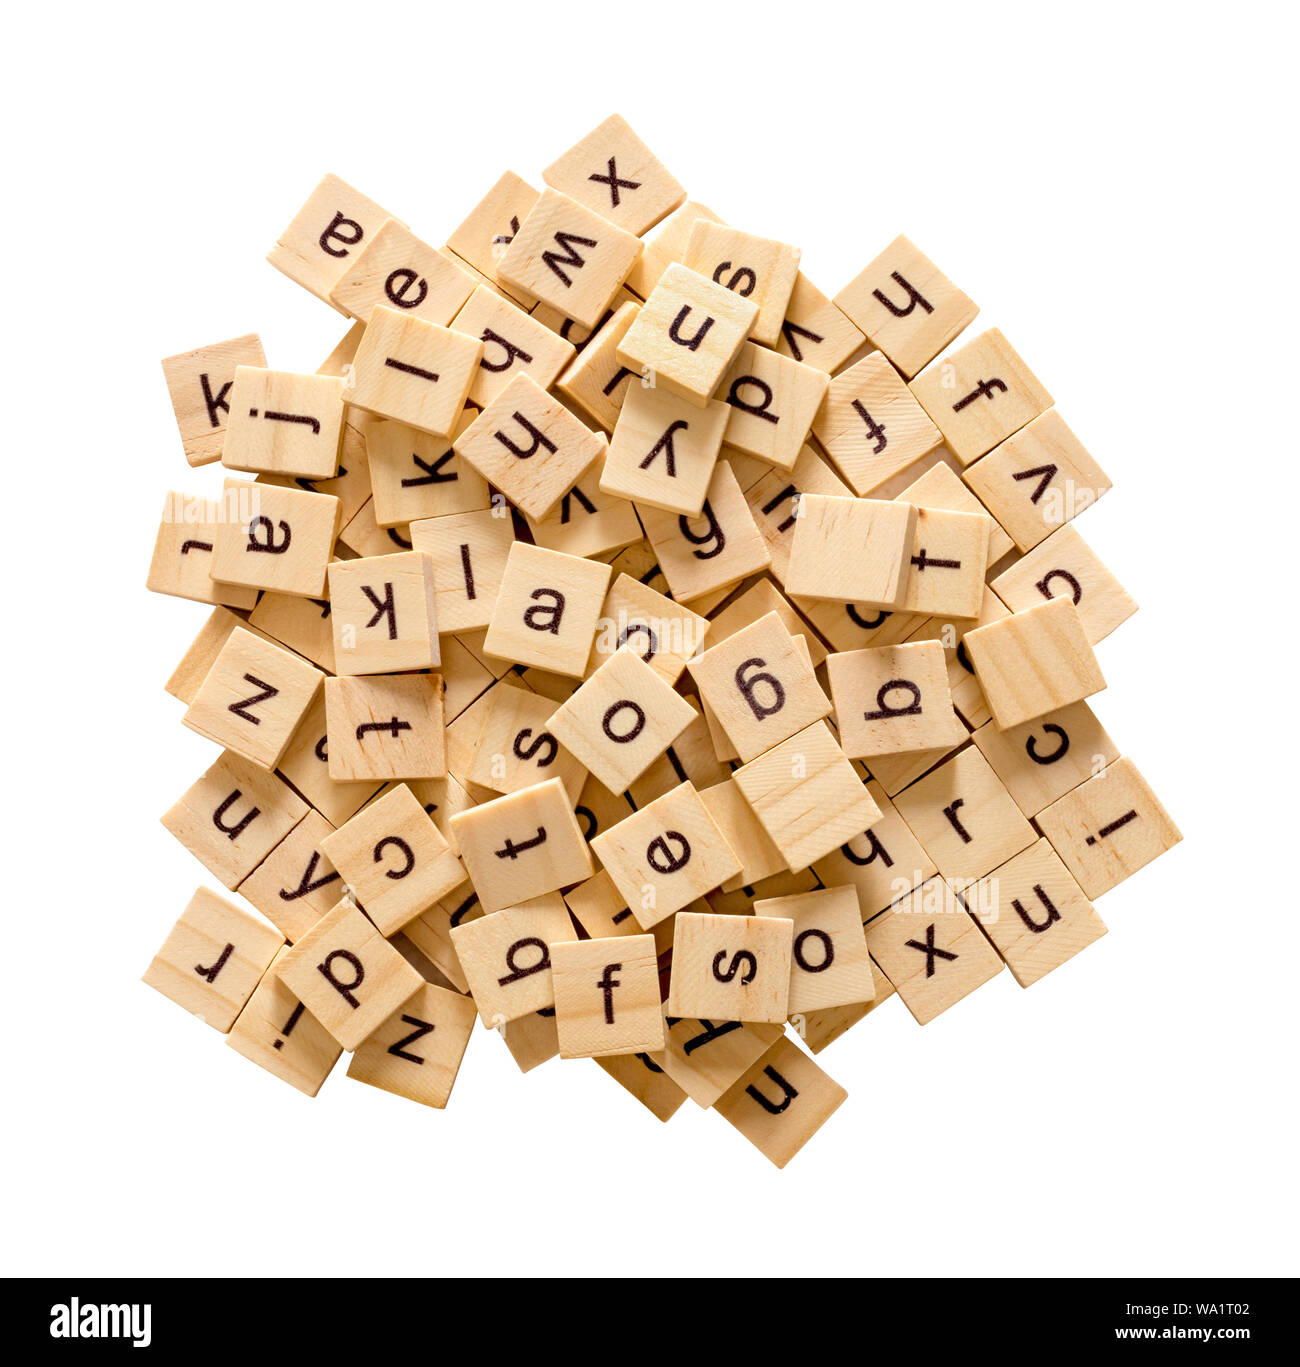 Pile of alphabet letters on wooden scrabble pieces, isolated on white background with clipping path. Stock Photo